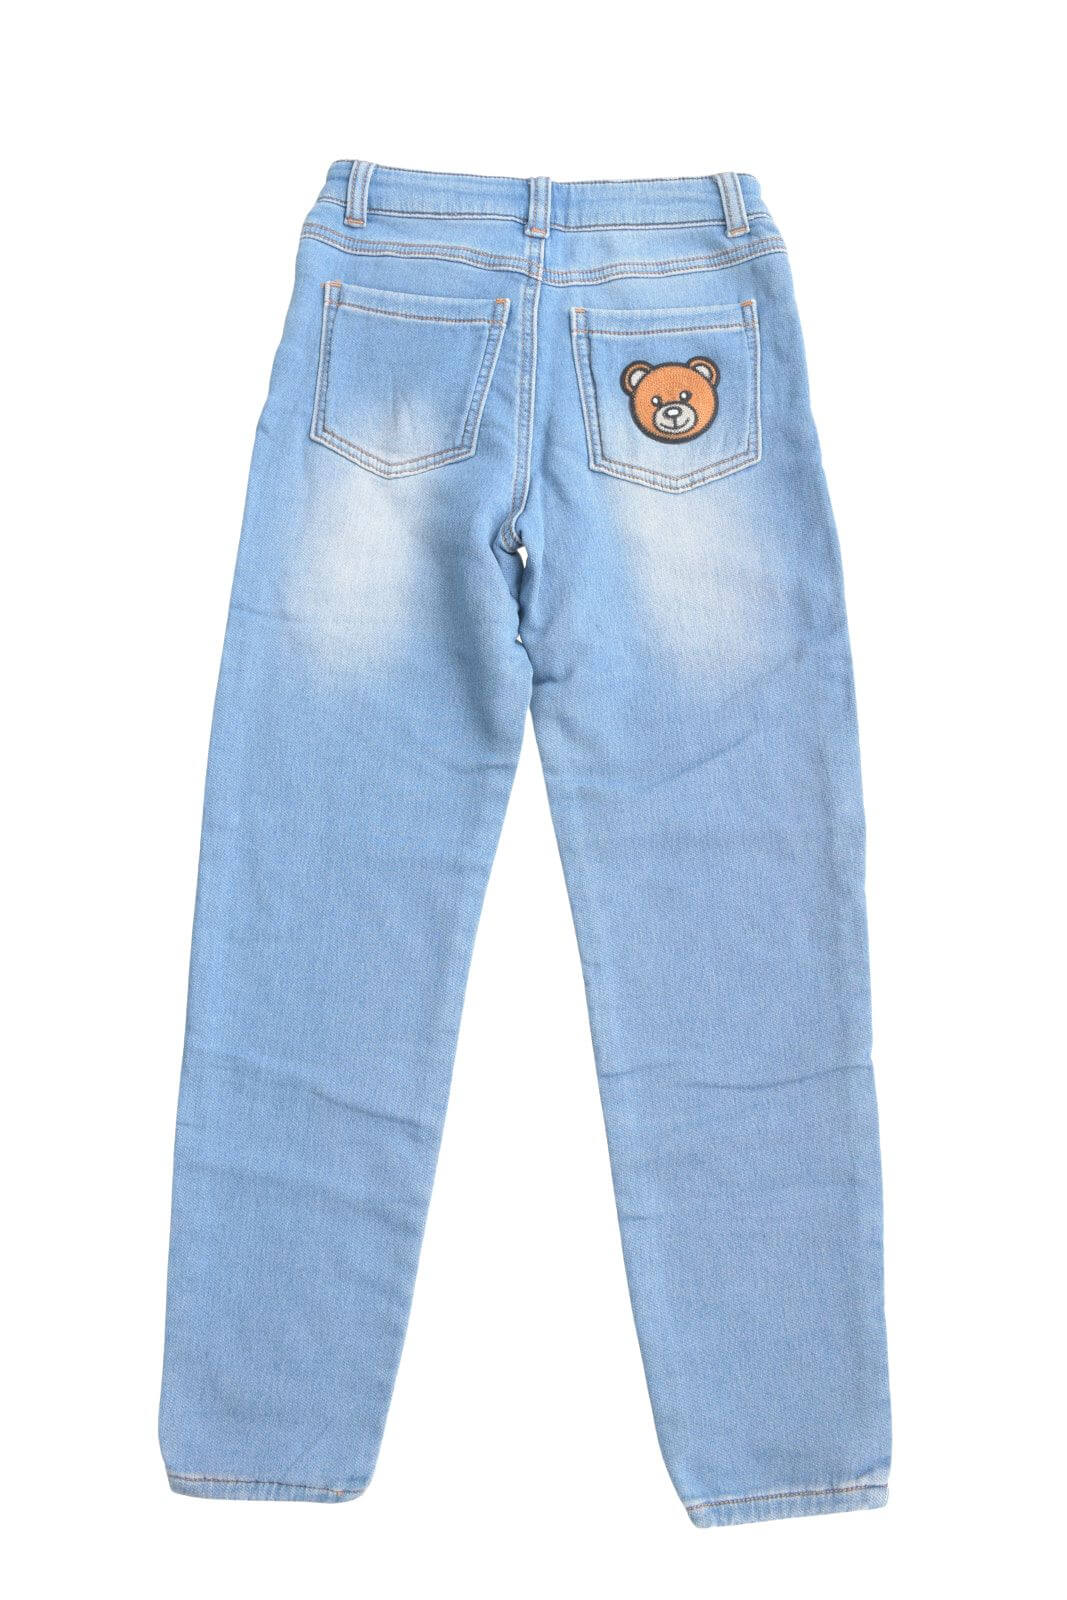 Moschino Kids Jeans Bambina con patch Teddy